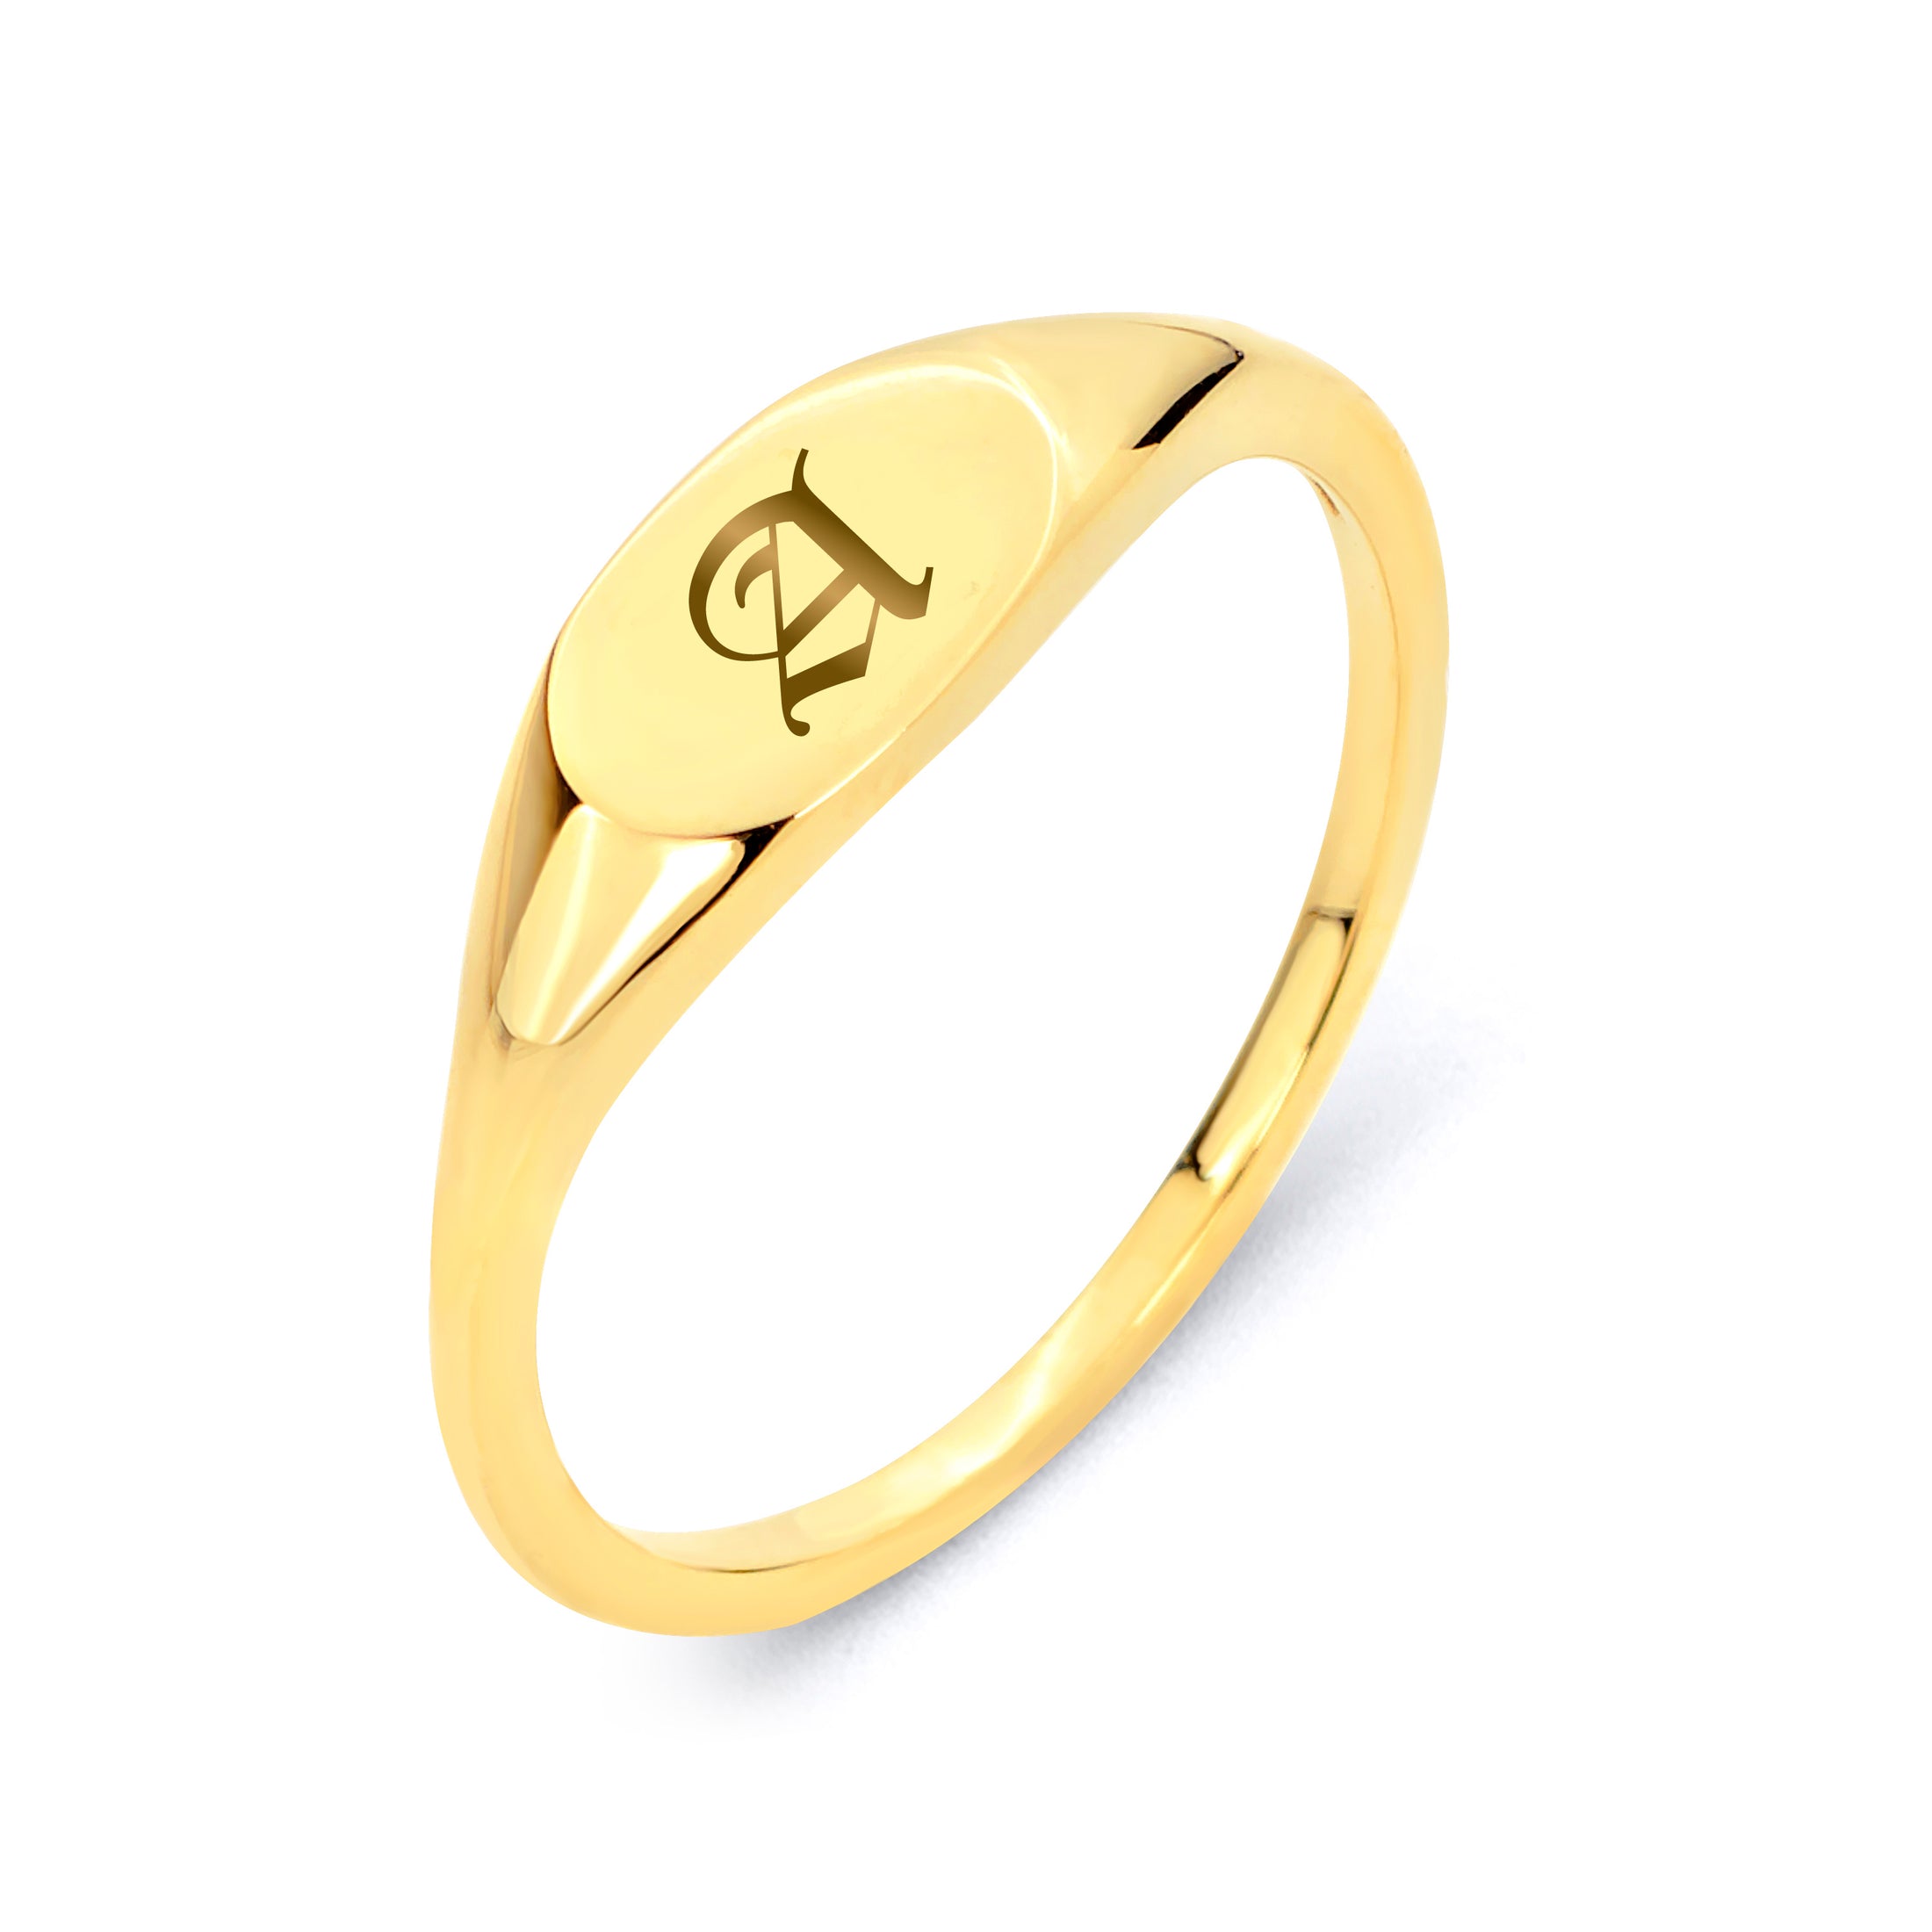 Solid Gold Old English Initial Signet Ring - 10k or 14k